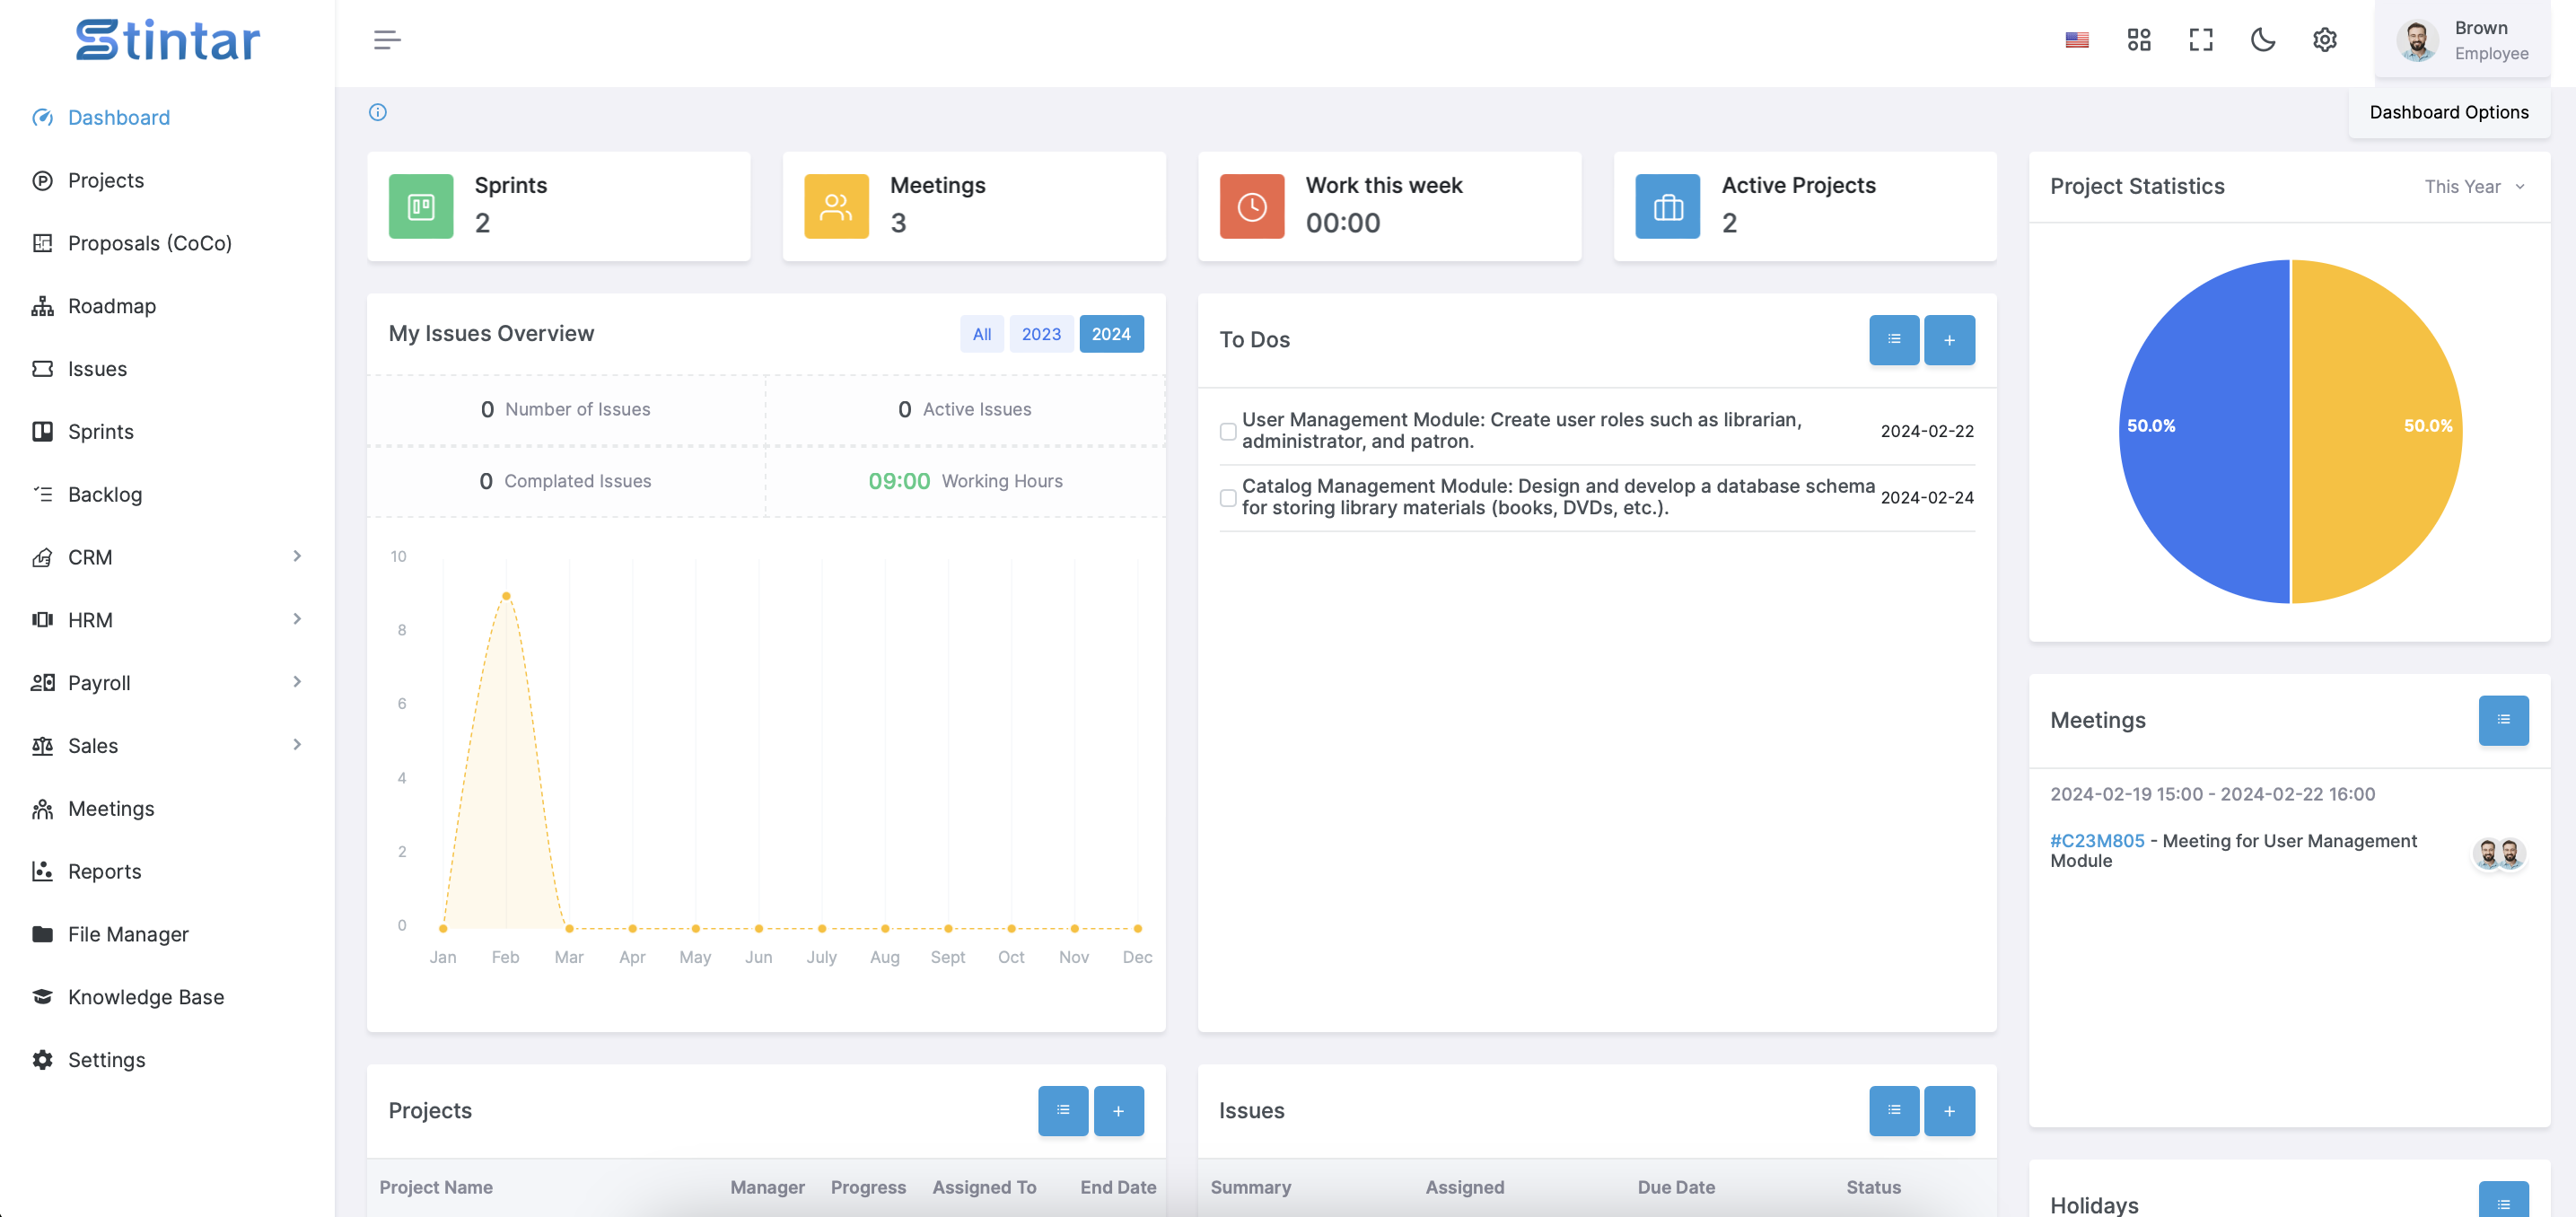 Efficiently manage projects with Stintar: Agile tools, CRM, HRM. Simplify workflows, track progress, and meet deadlines seamlessly